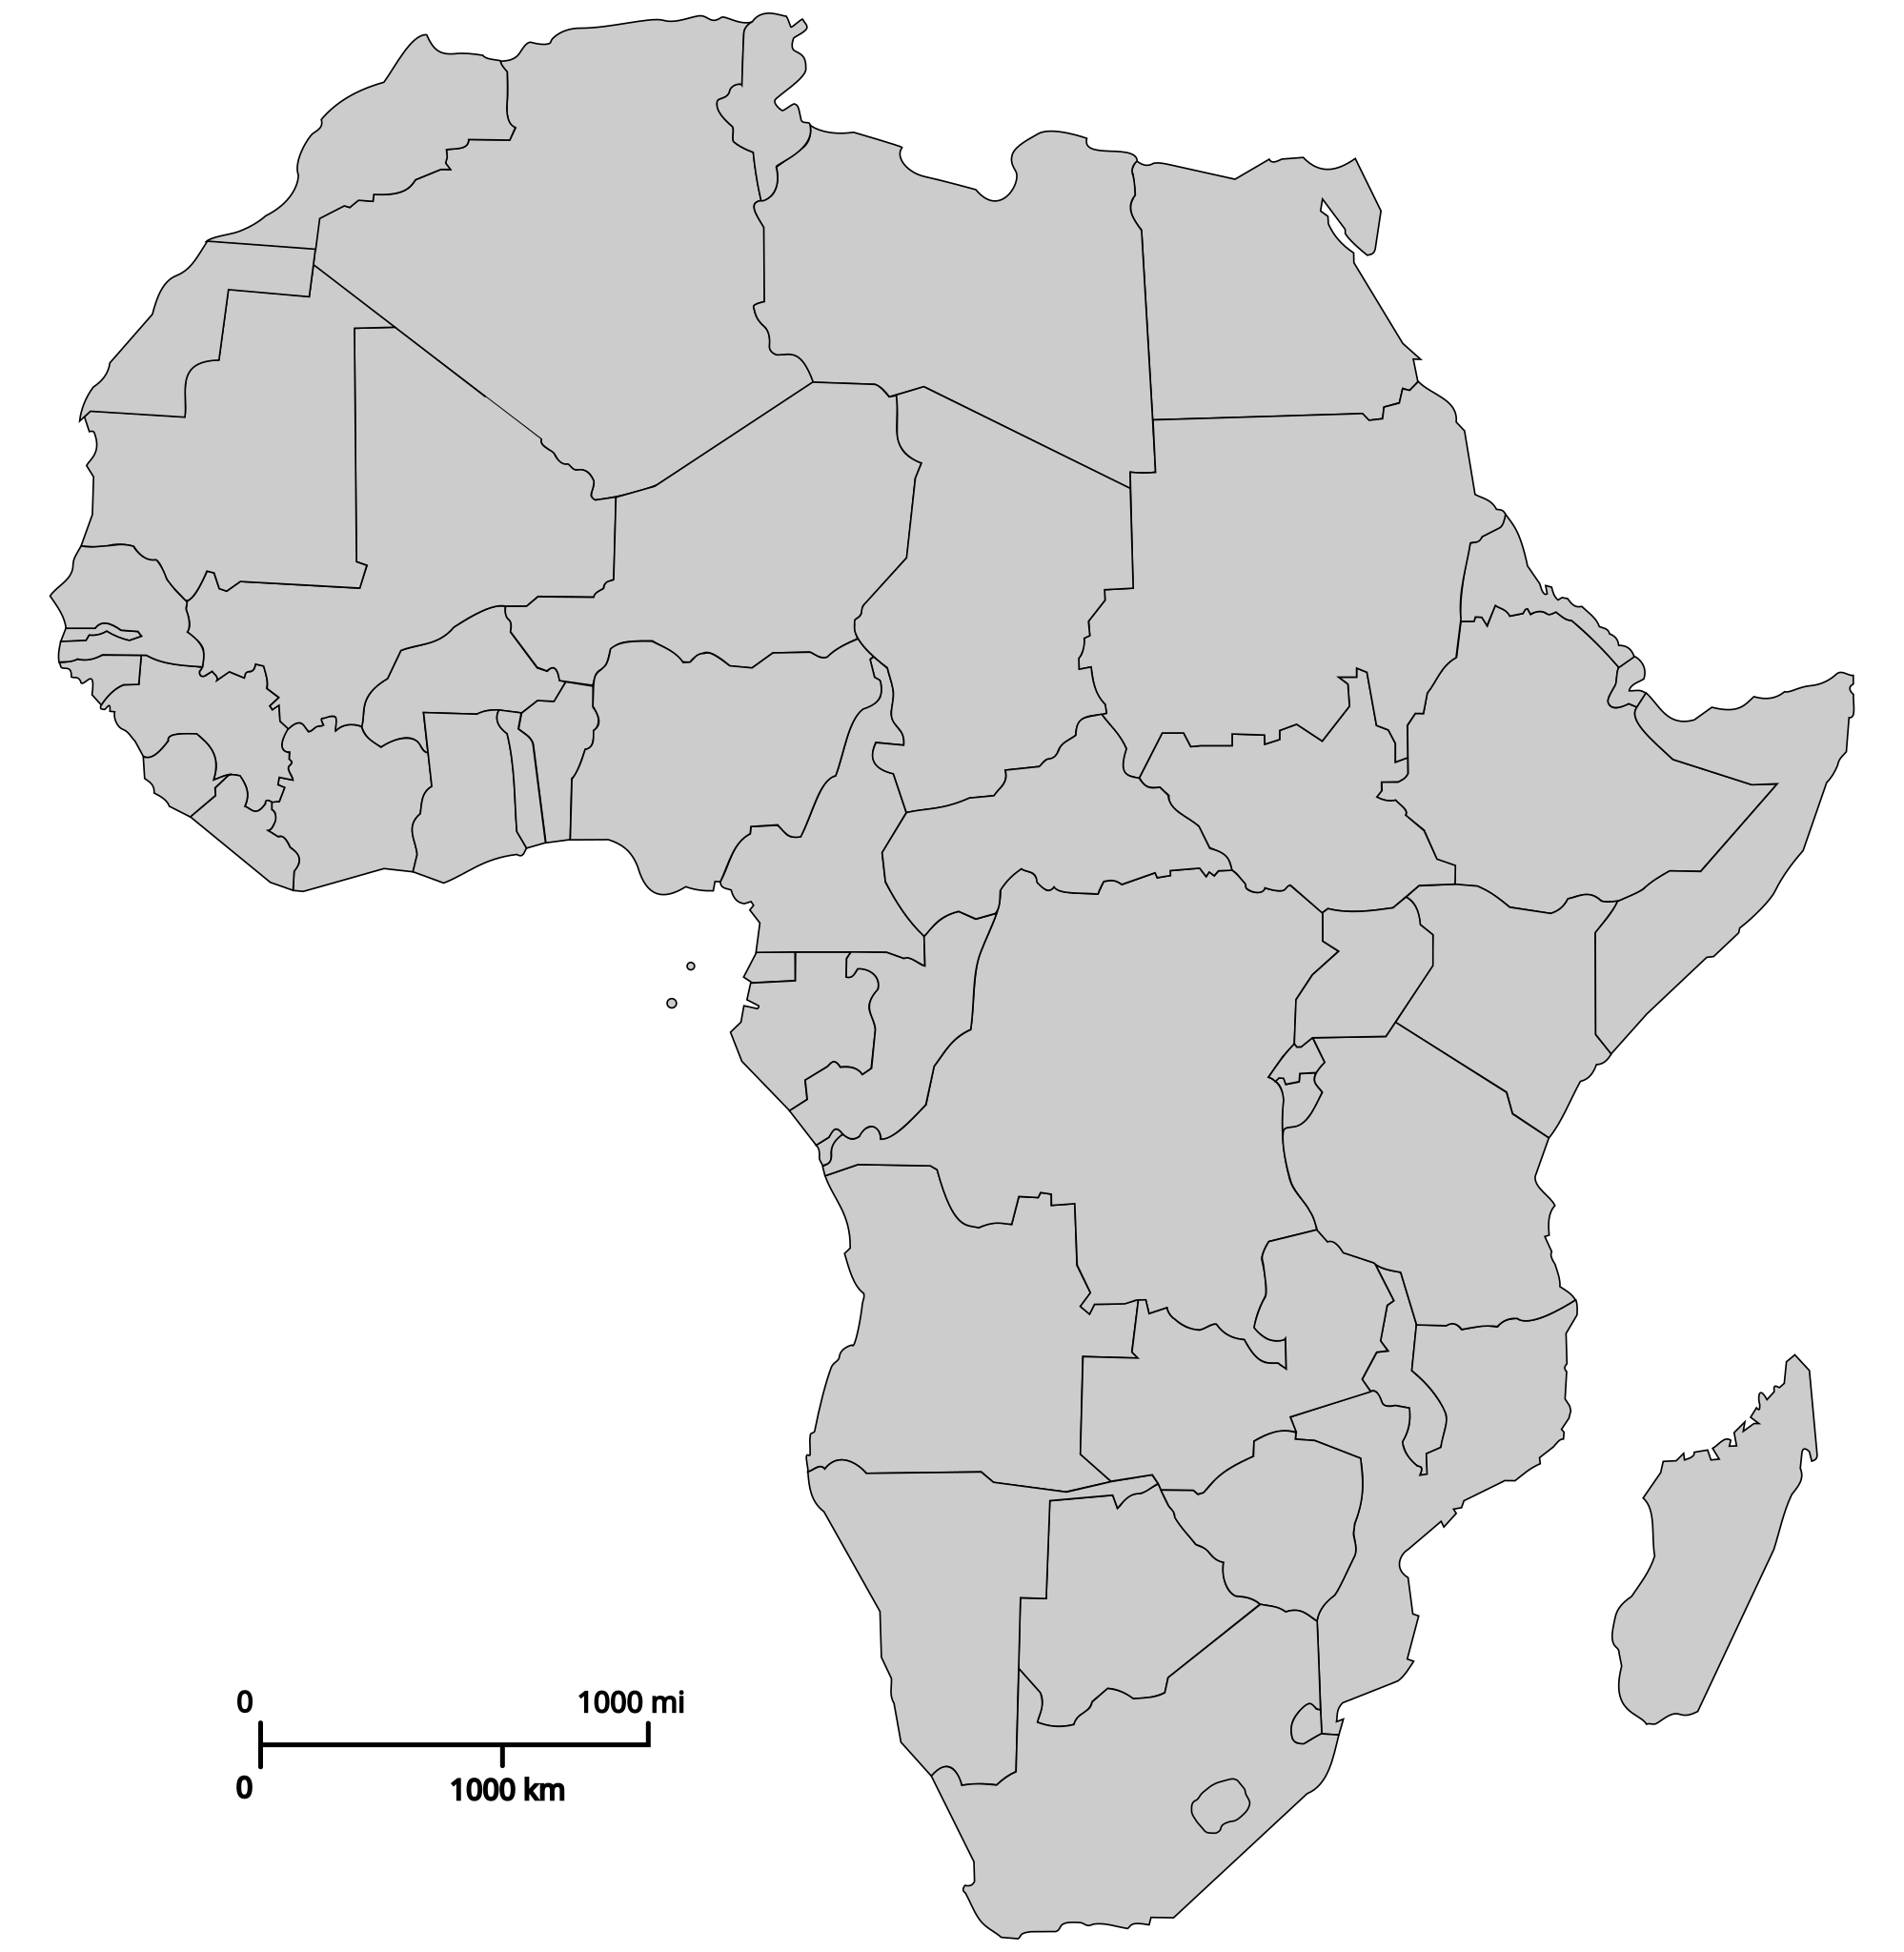 africa black and white map